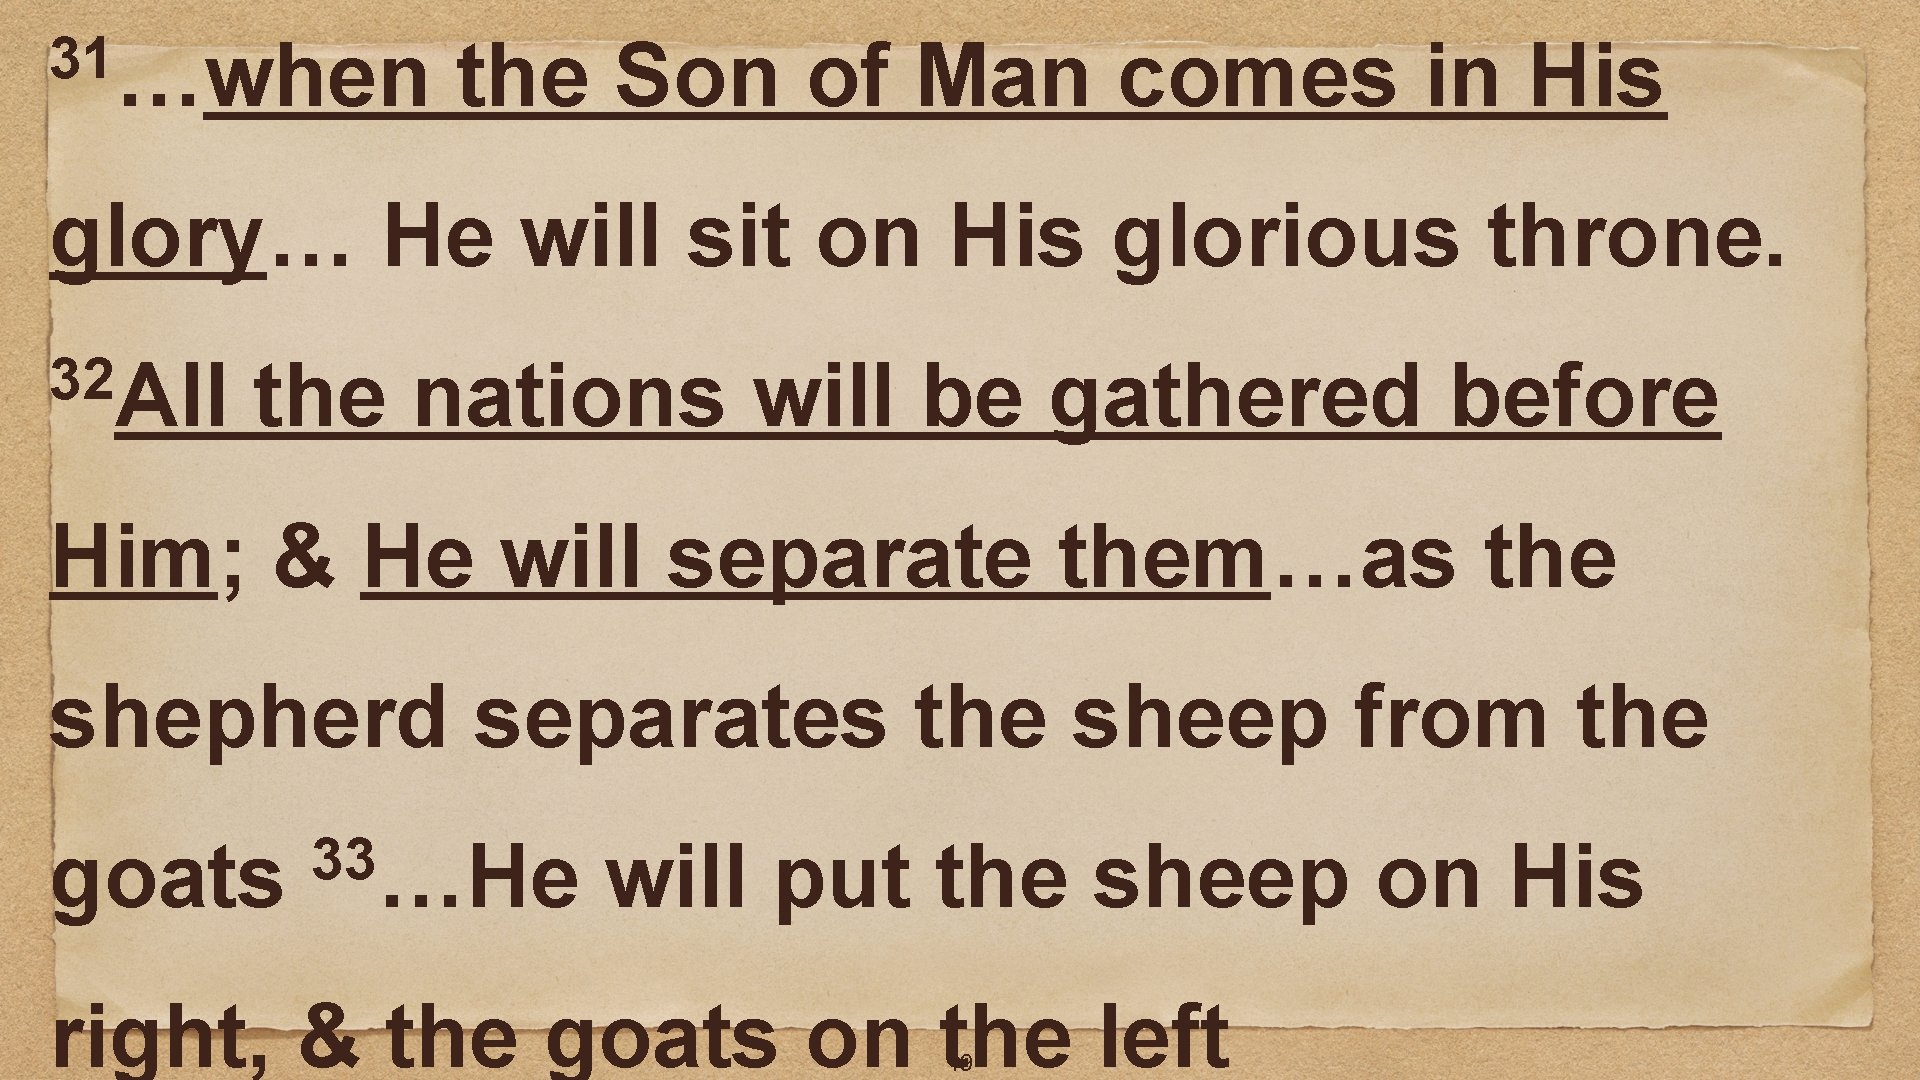 31…when the Son of Man comes in His glory… He will sit on His